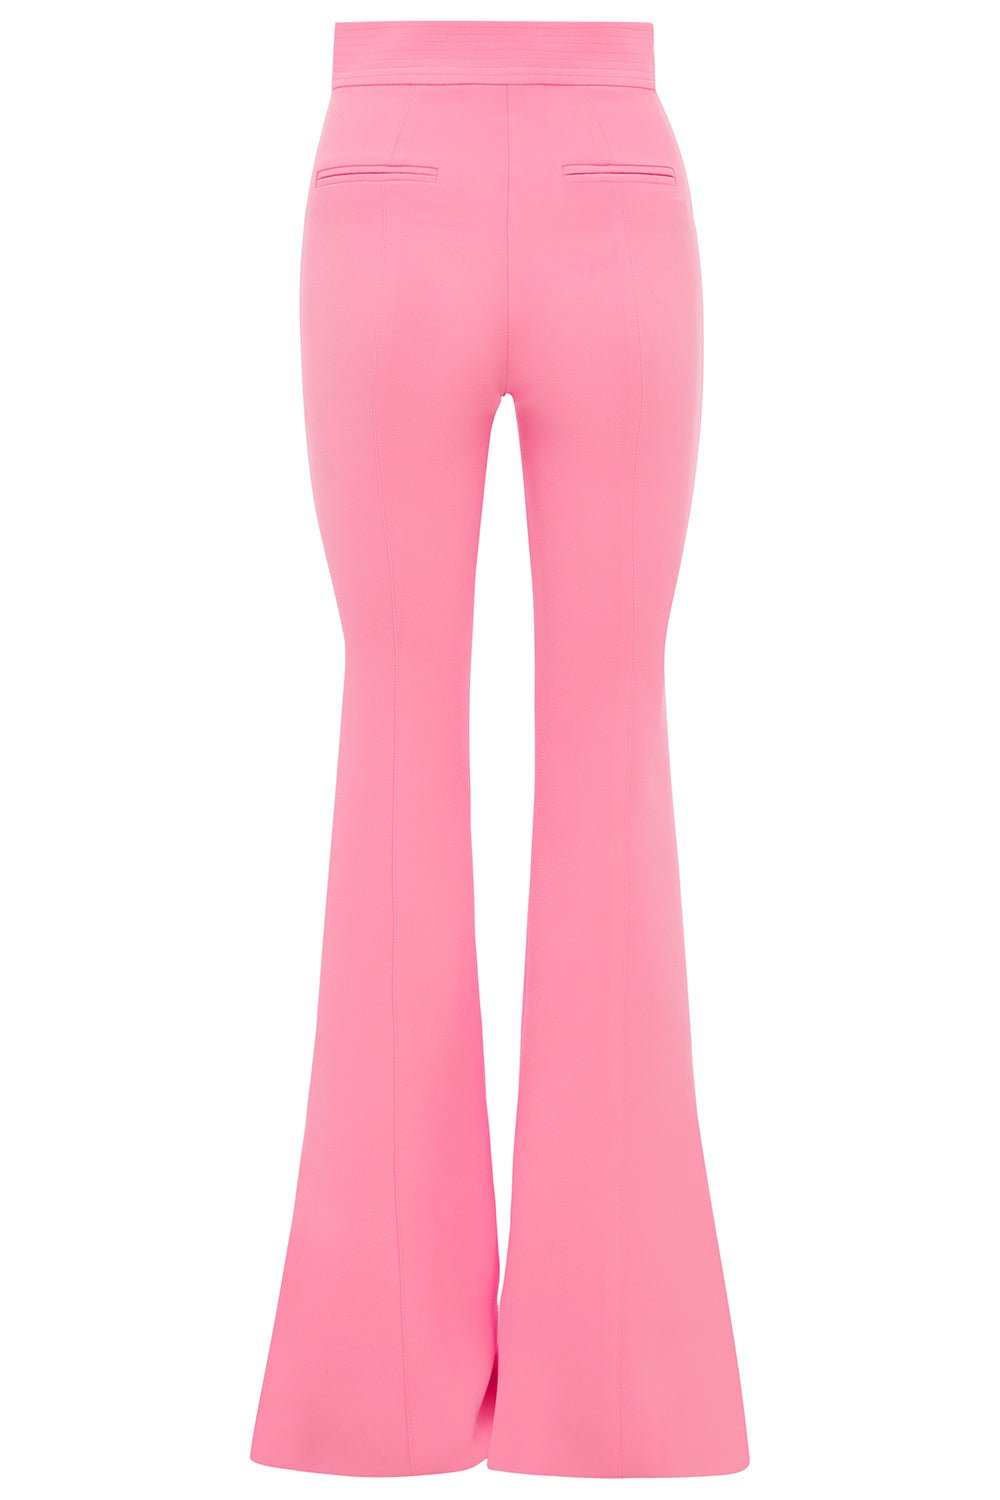 ALEX PERRY-Marden Pant - Pink-